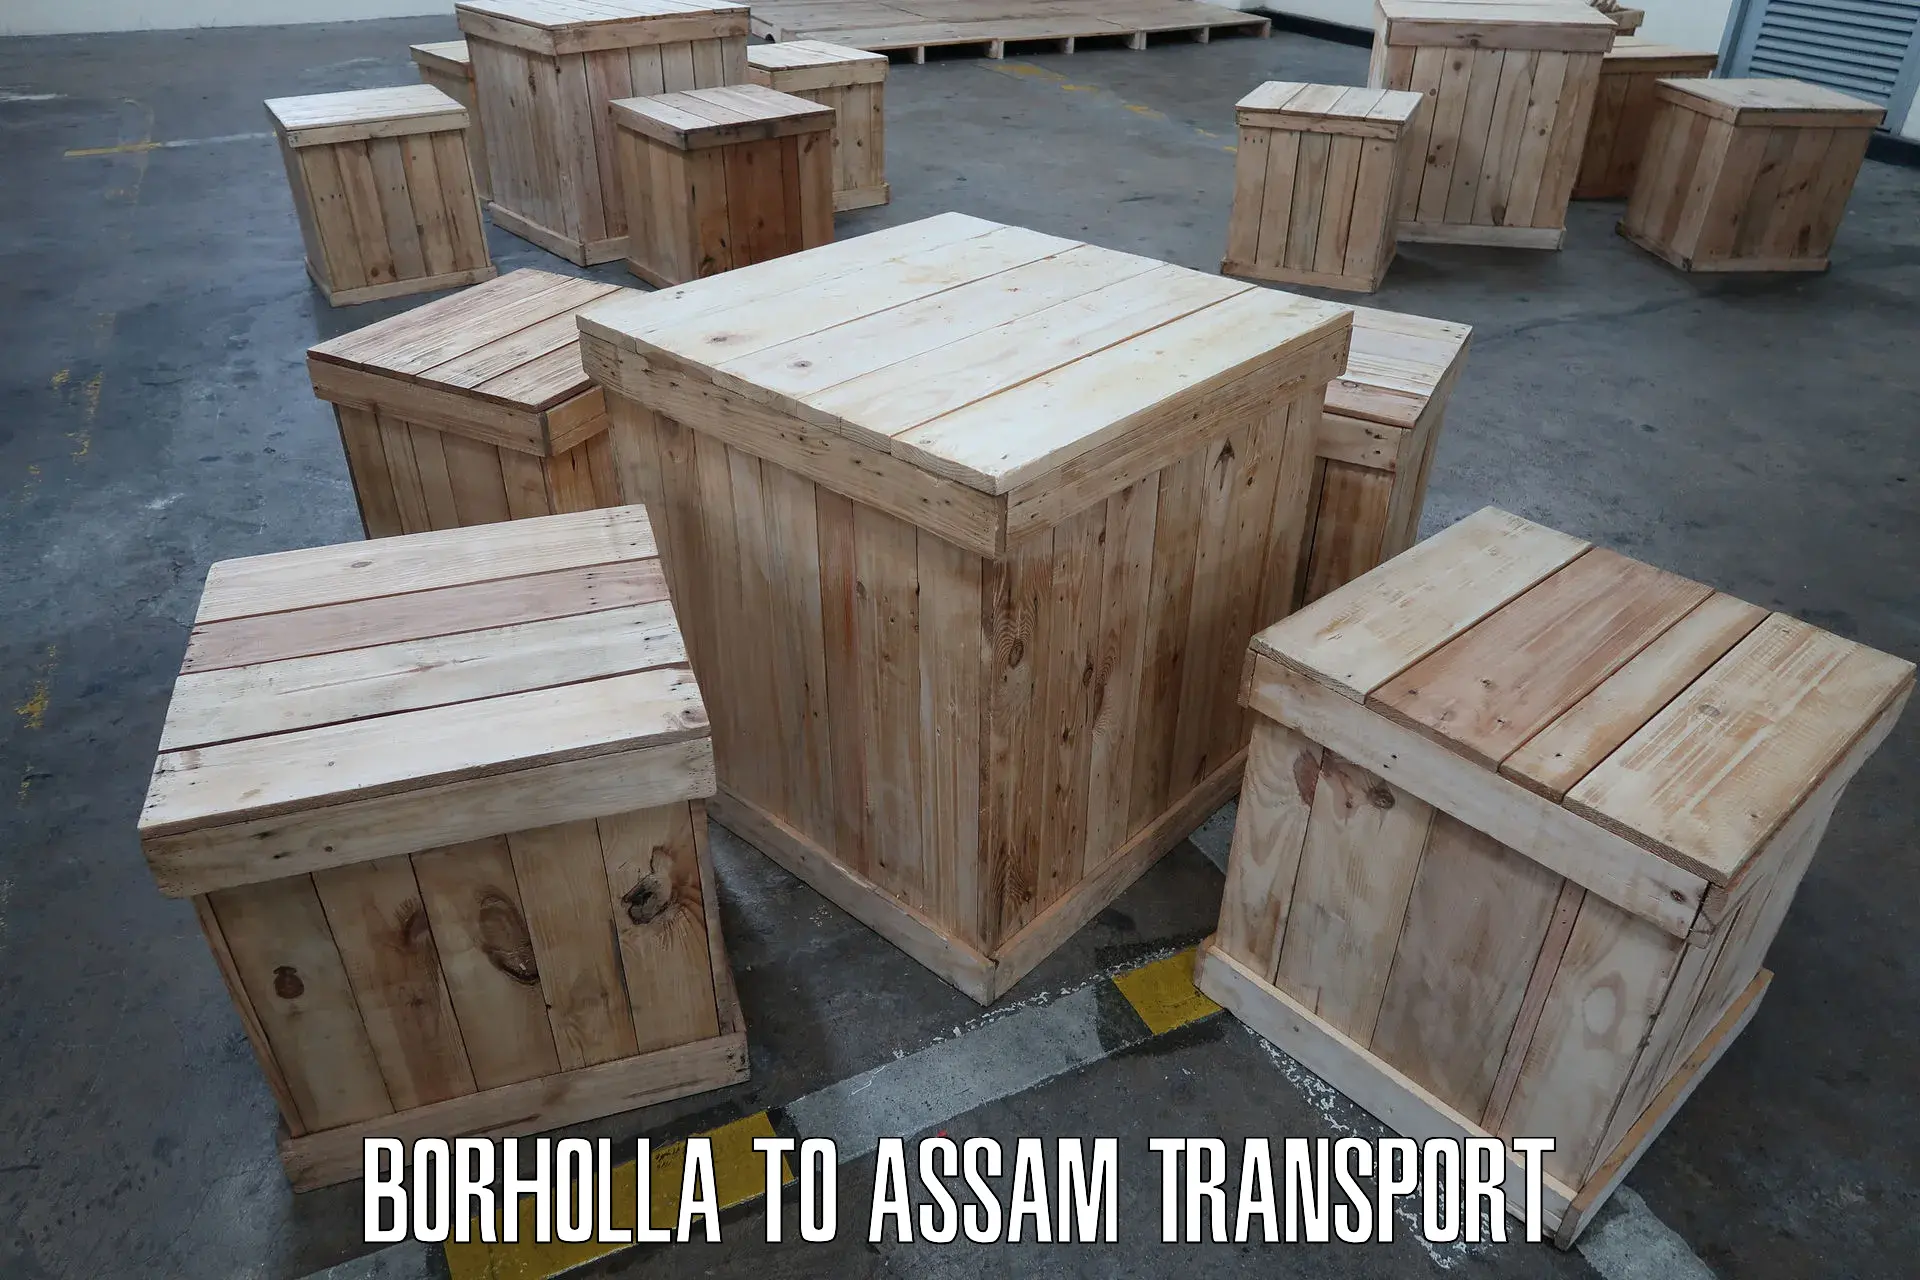 Truck transport companies in India Borholla to Lala Assam